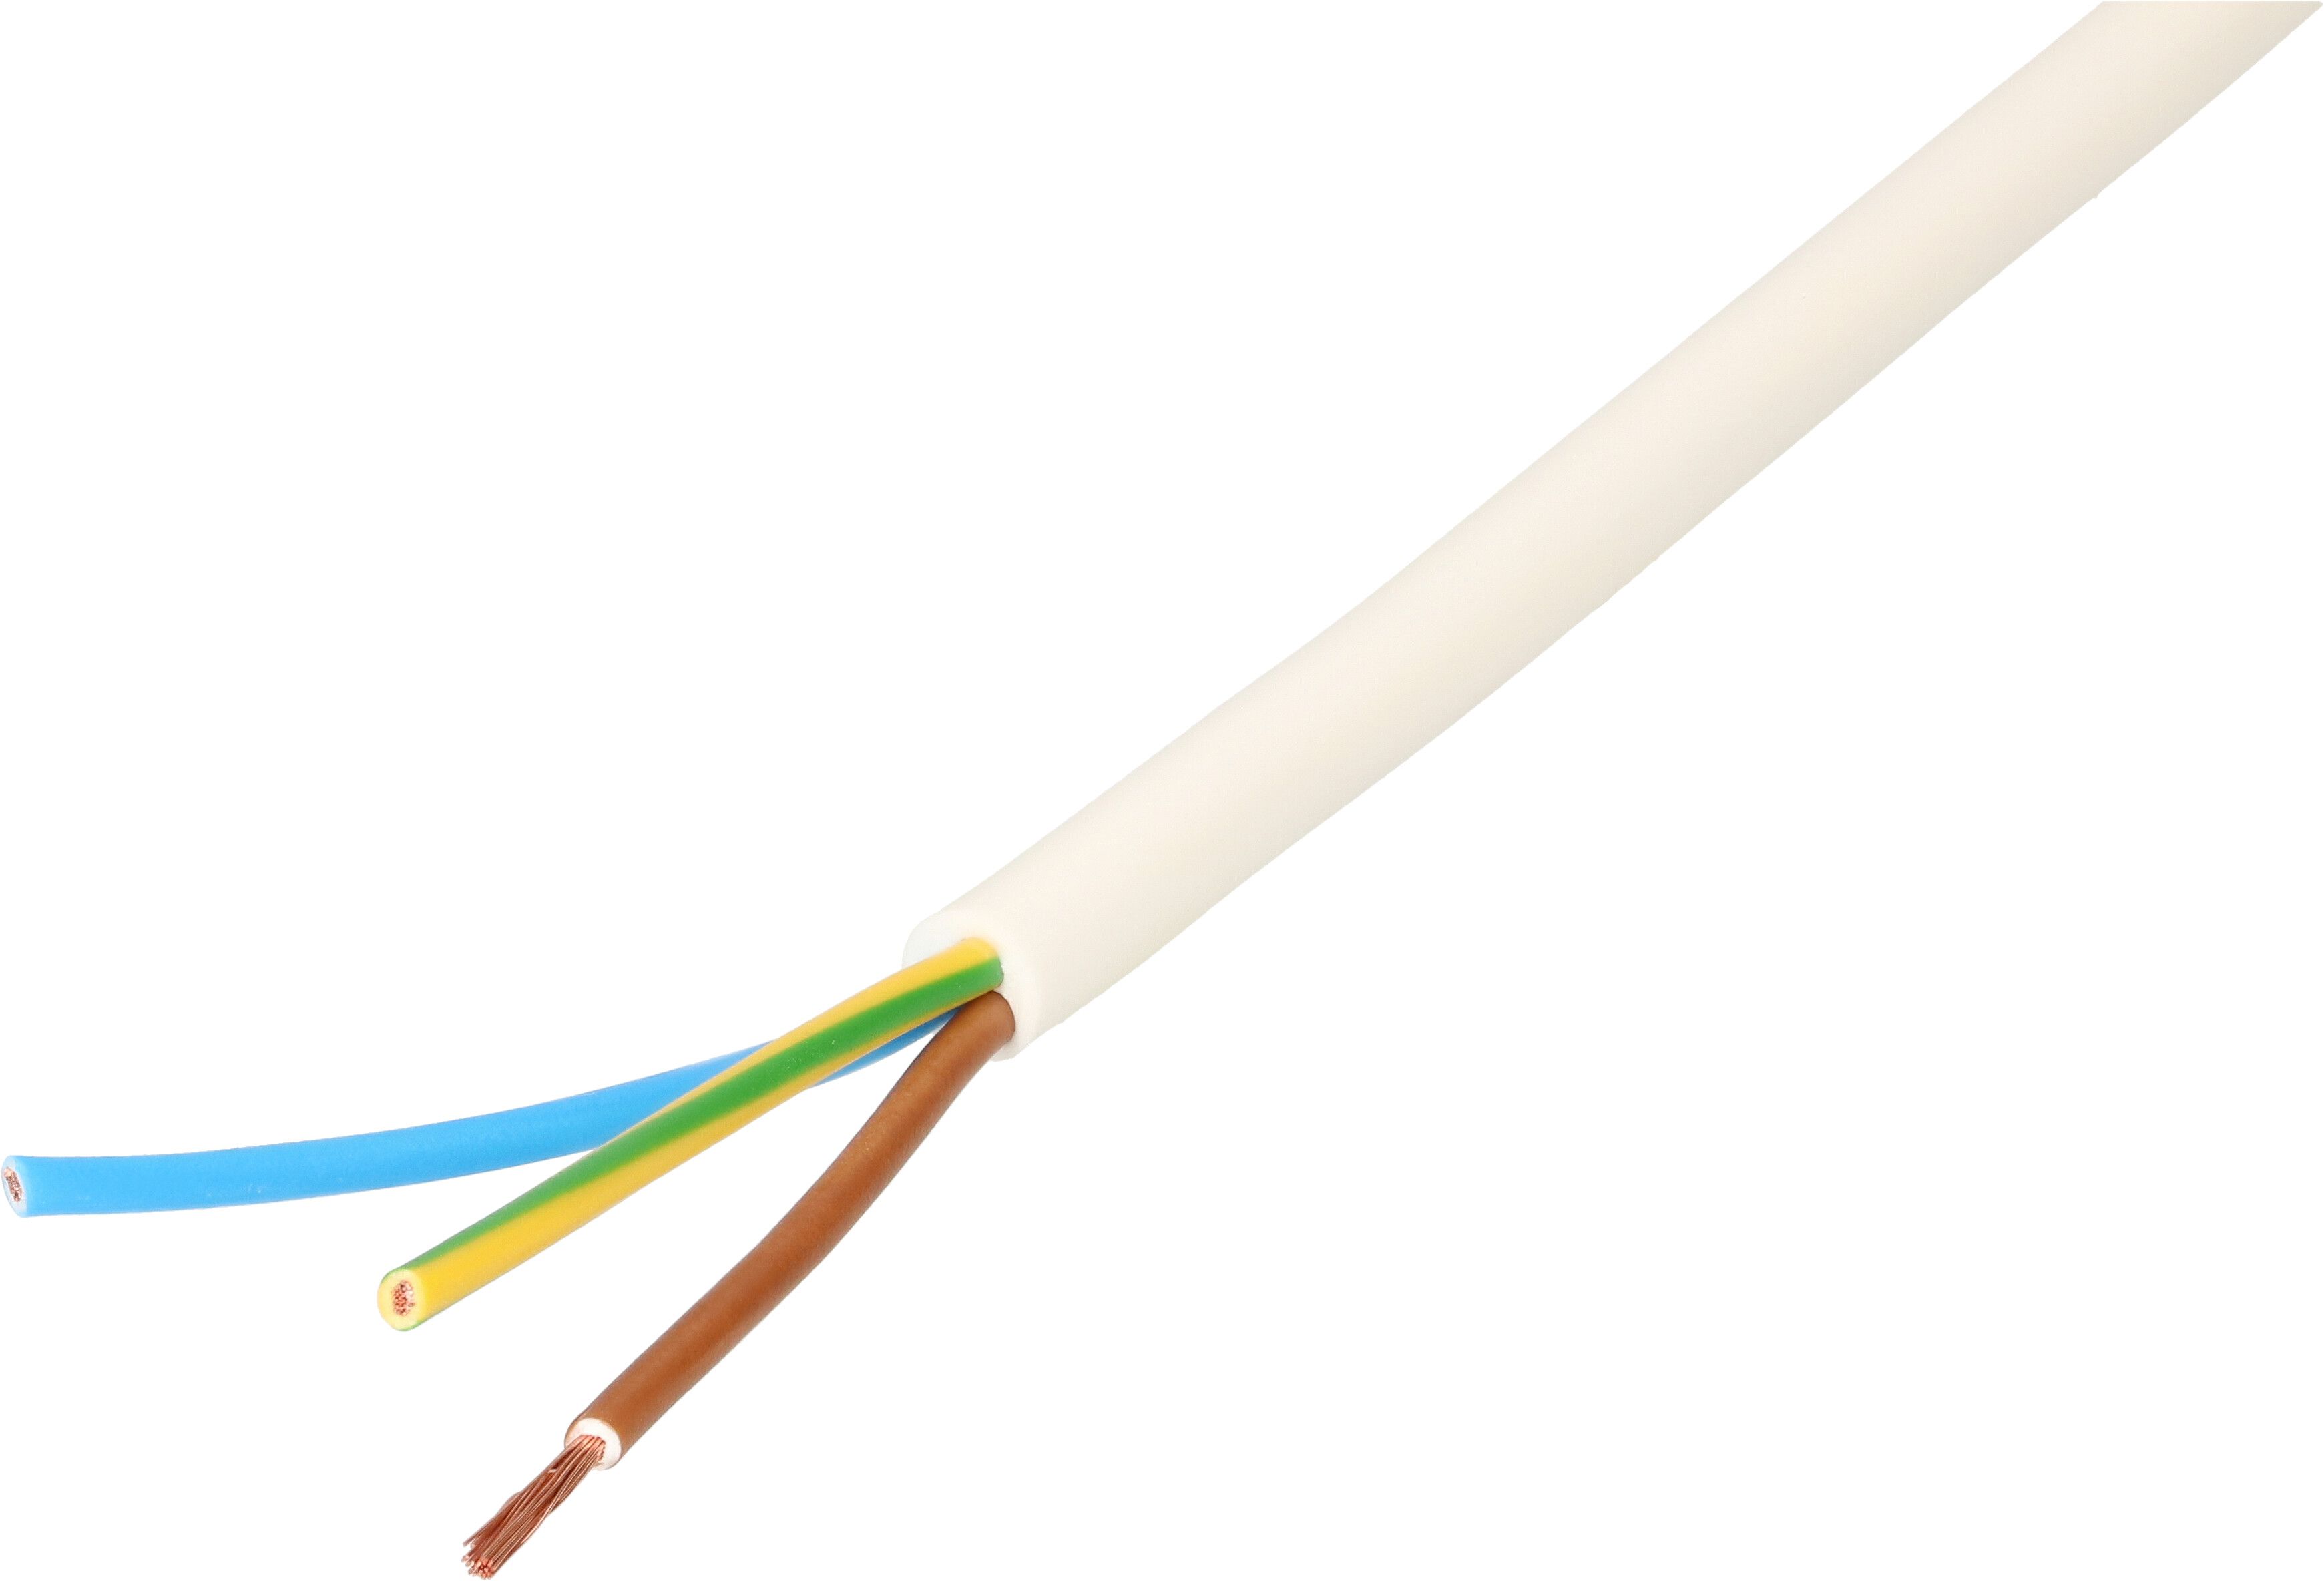 Cable H05VV-F3G1,0mm2 white